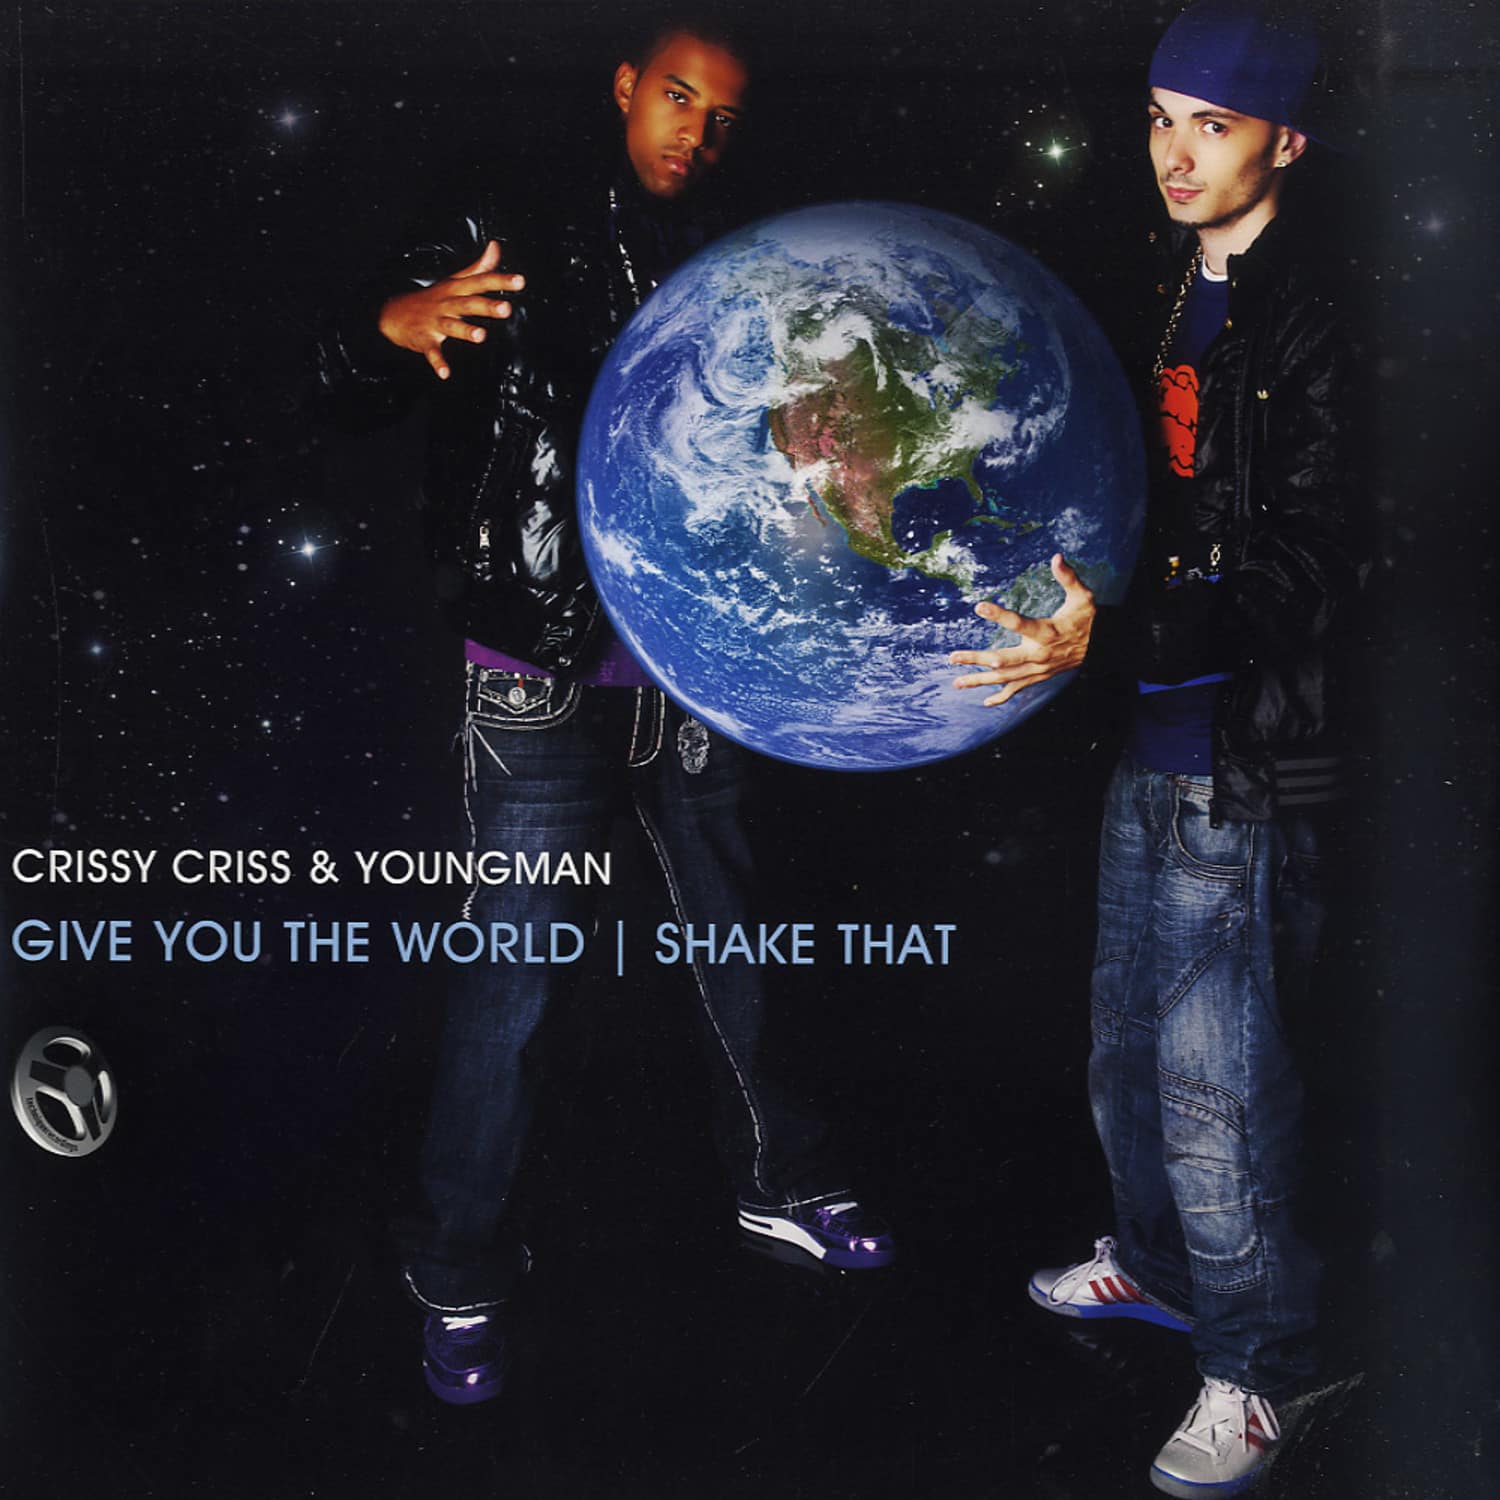 Crissy Criss & Youngman - GIVE YOU THE WORLD